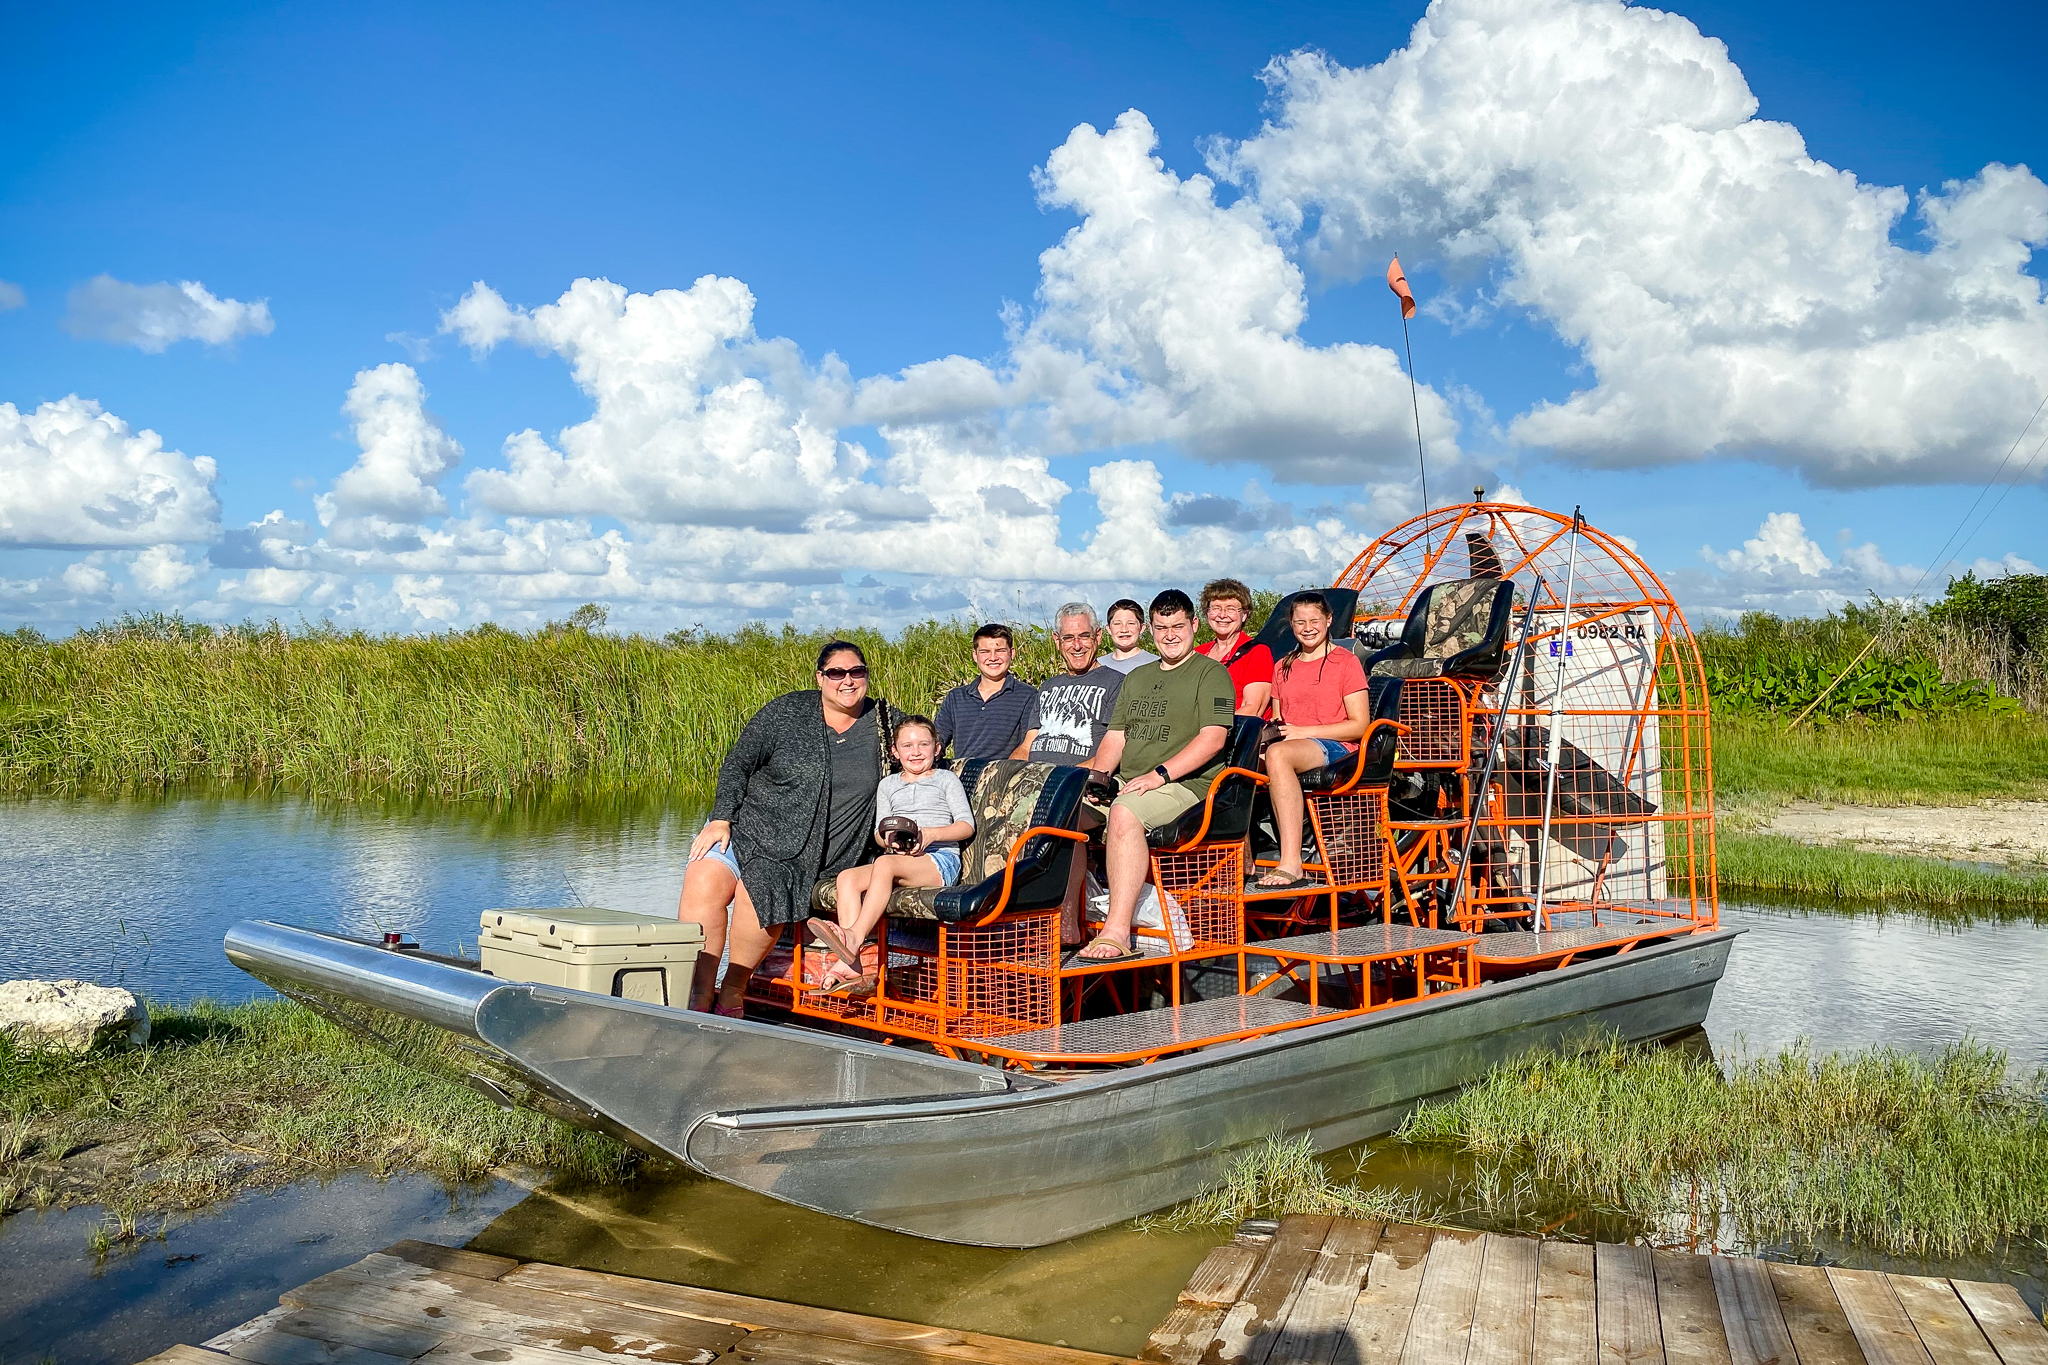 Smiling family on airboat ready to explore the Everglades